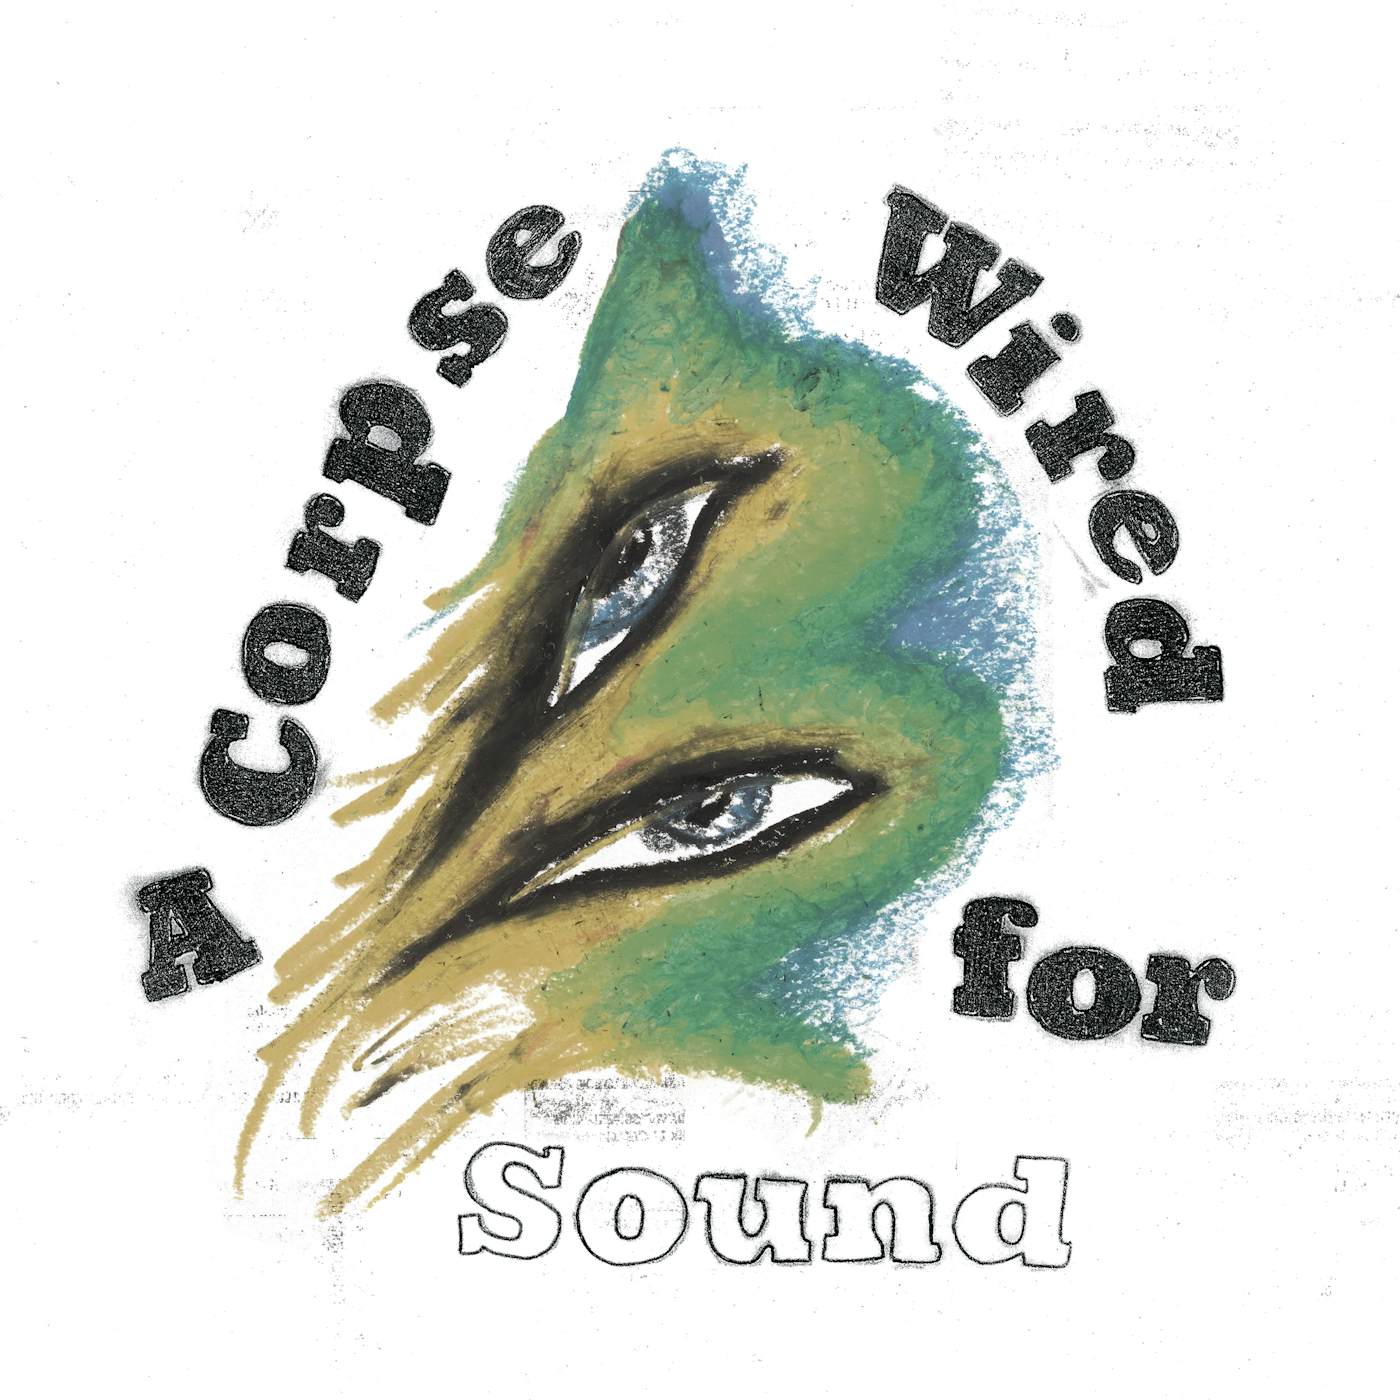 Merchandise CORPSE WIRED FOR SOUND Vinyl Record